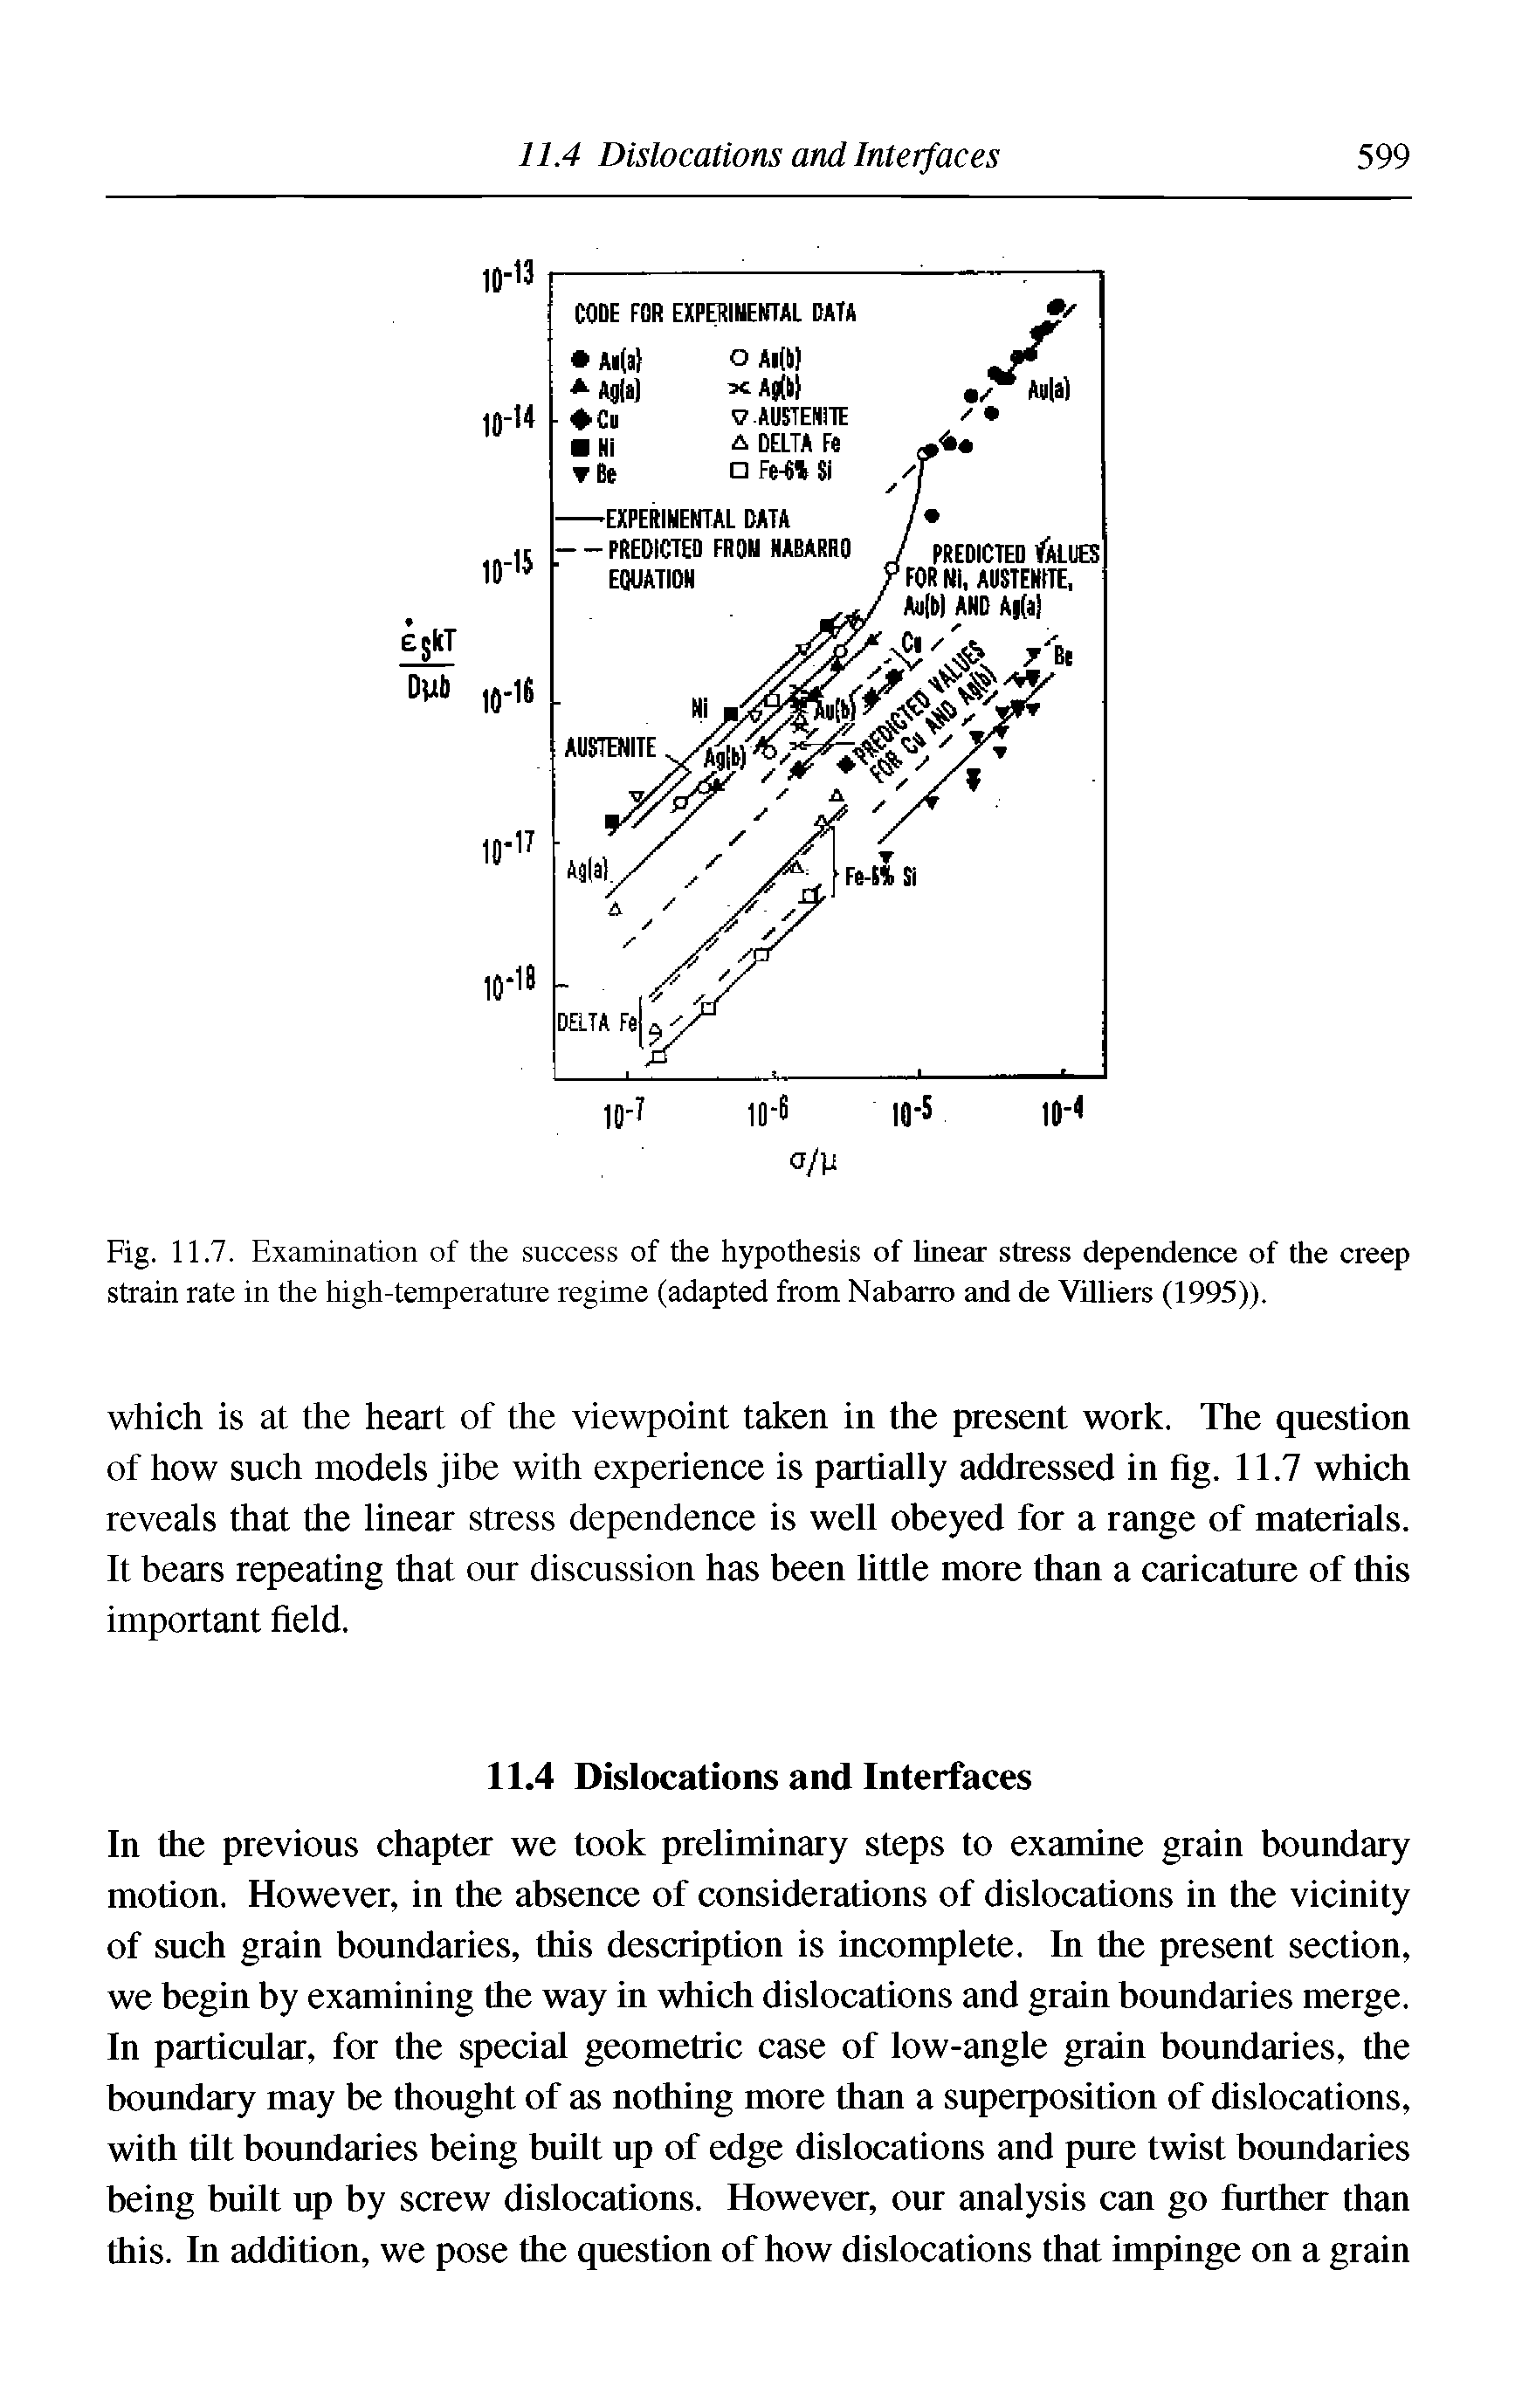 Fig. 11.7. Examination of the success of the hypothesis of linear stress dependence of the creep strain rate in the high-temperature regime (adapted from Nabarro and de Villiers (1995)).